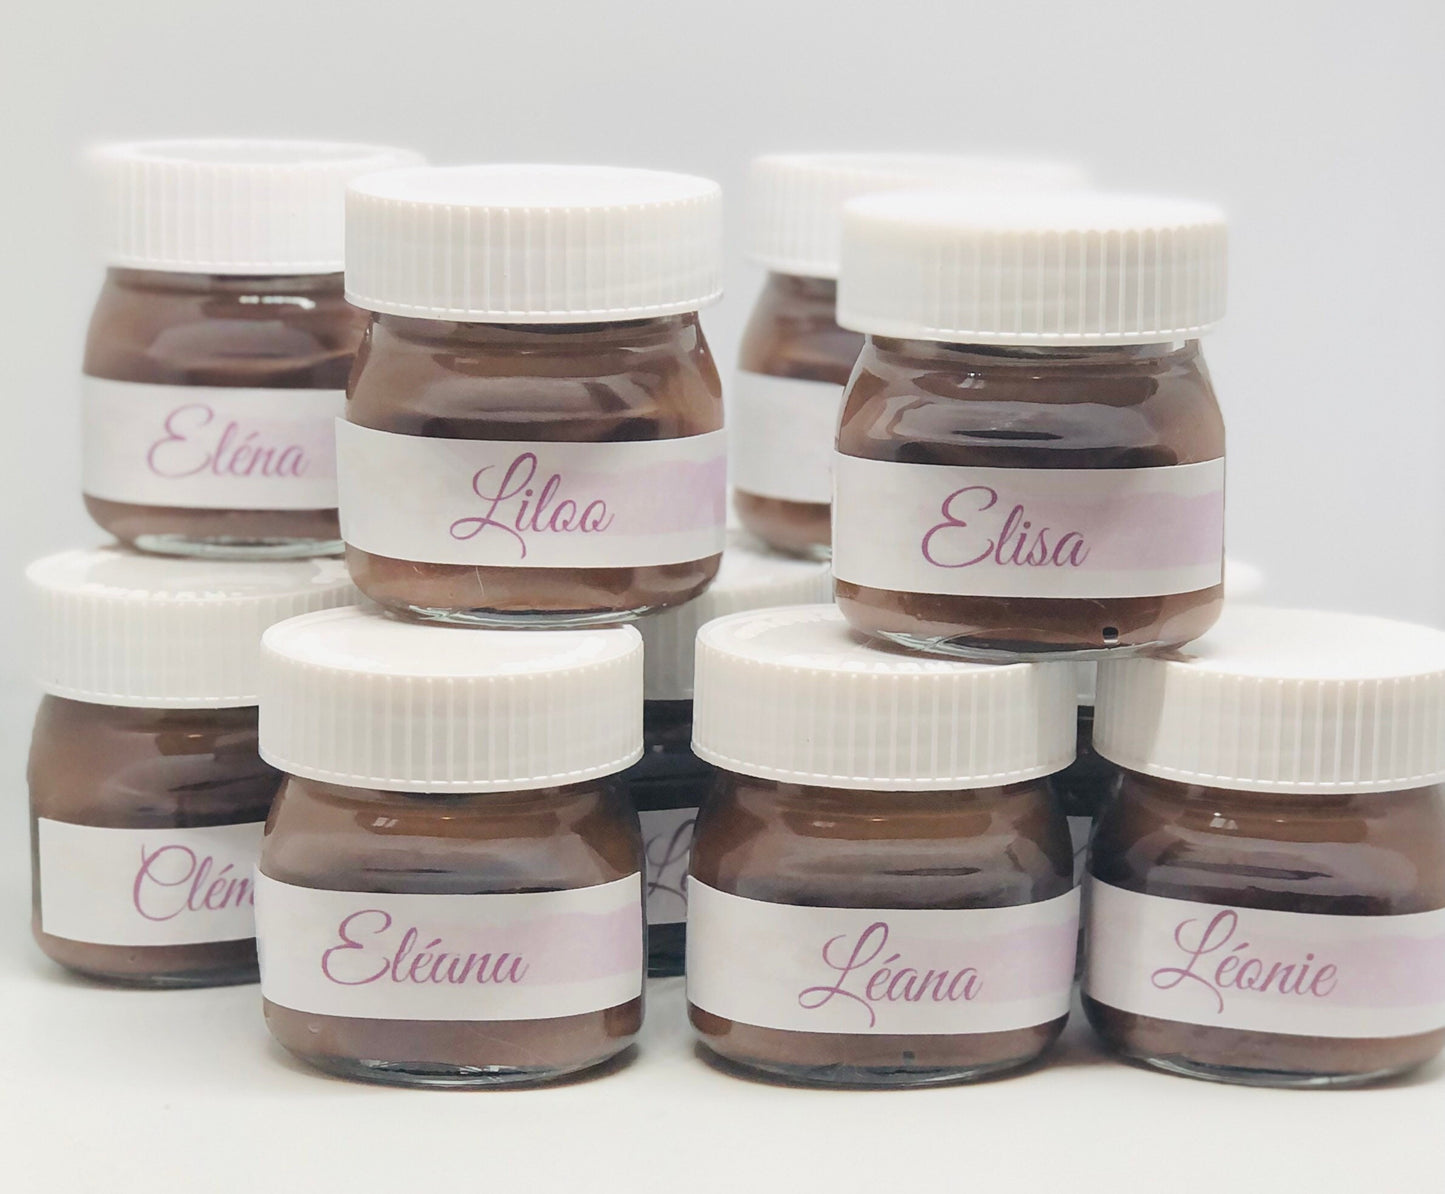 Mini Nutella customized to offer